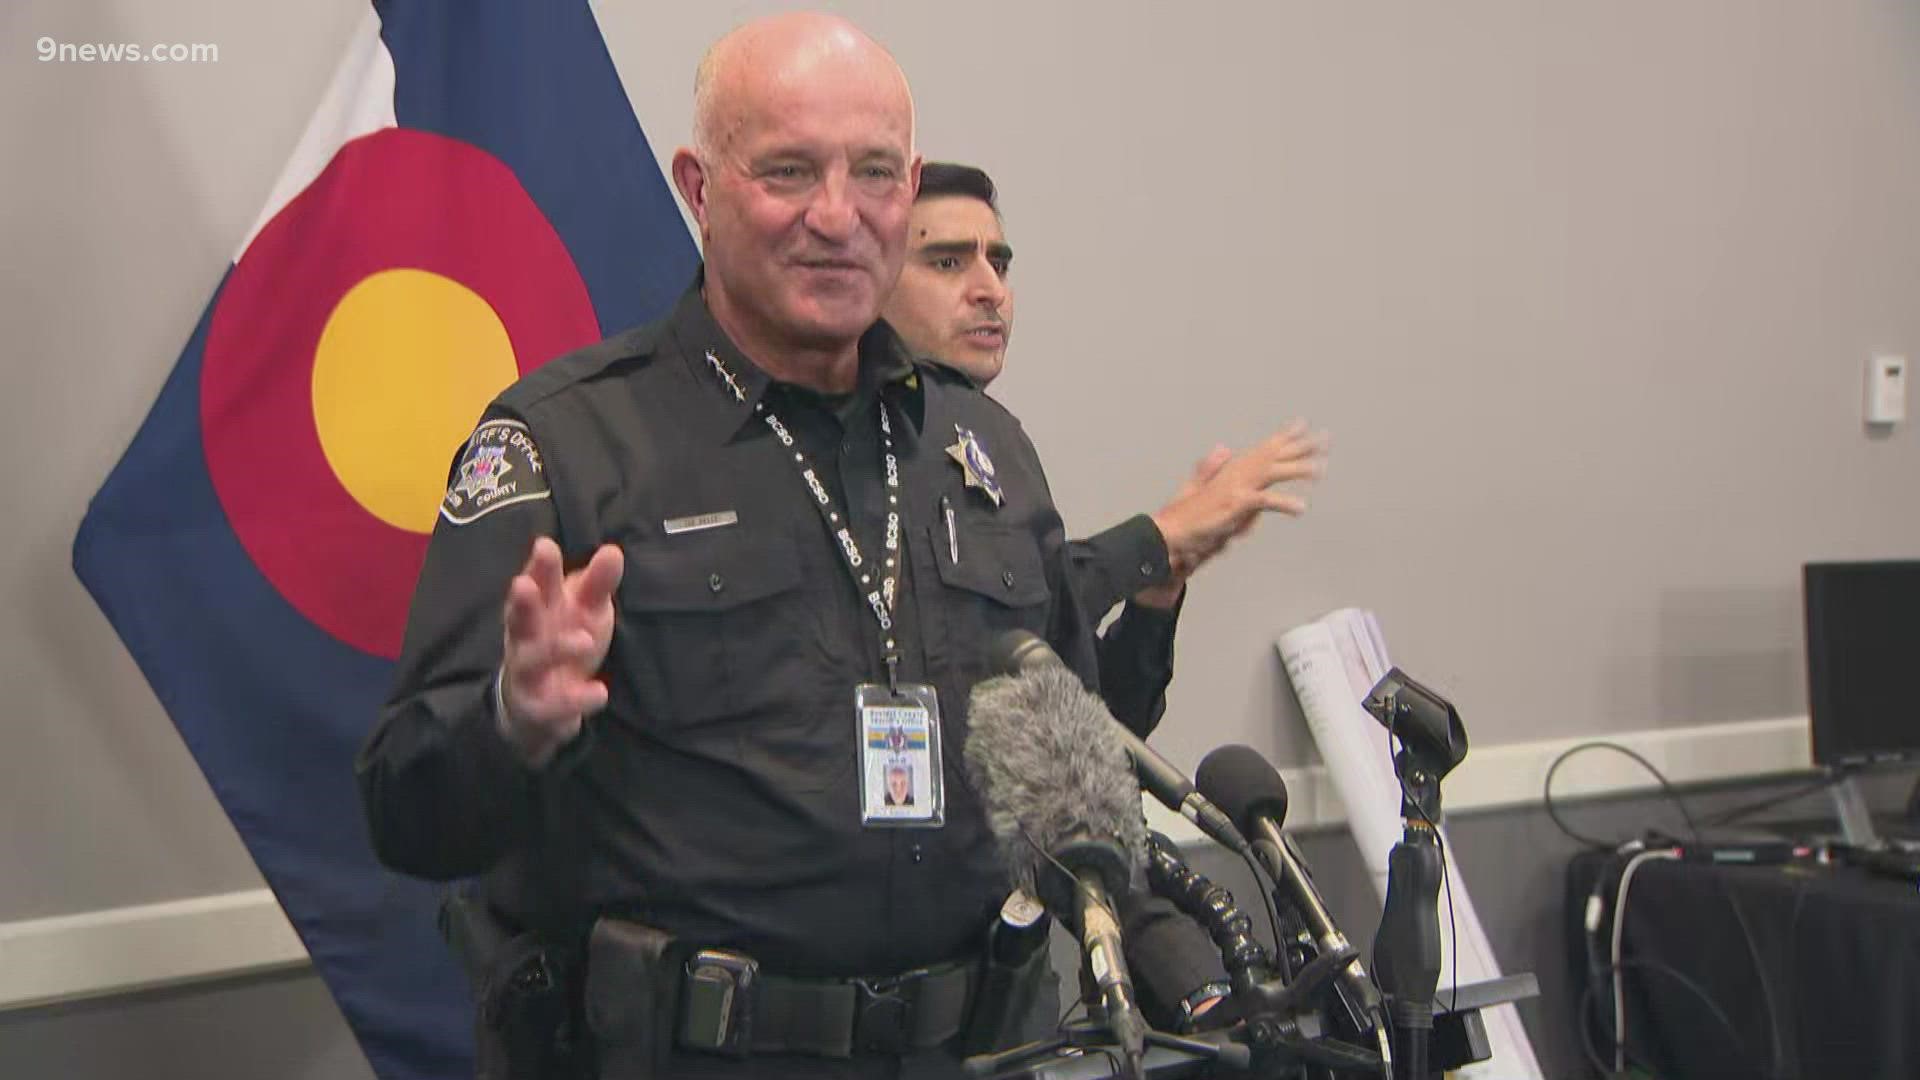 One of the three people who was missing has been found alive and well, Sheriff Joe Pelle said.